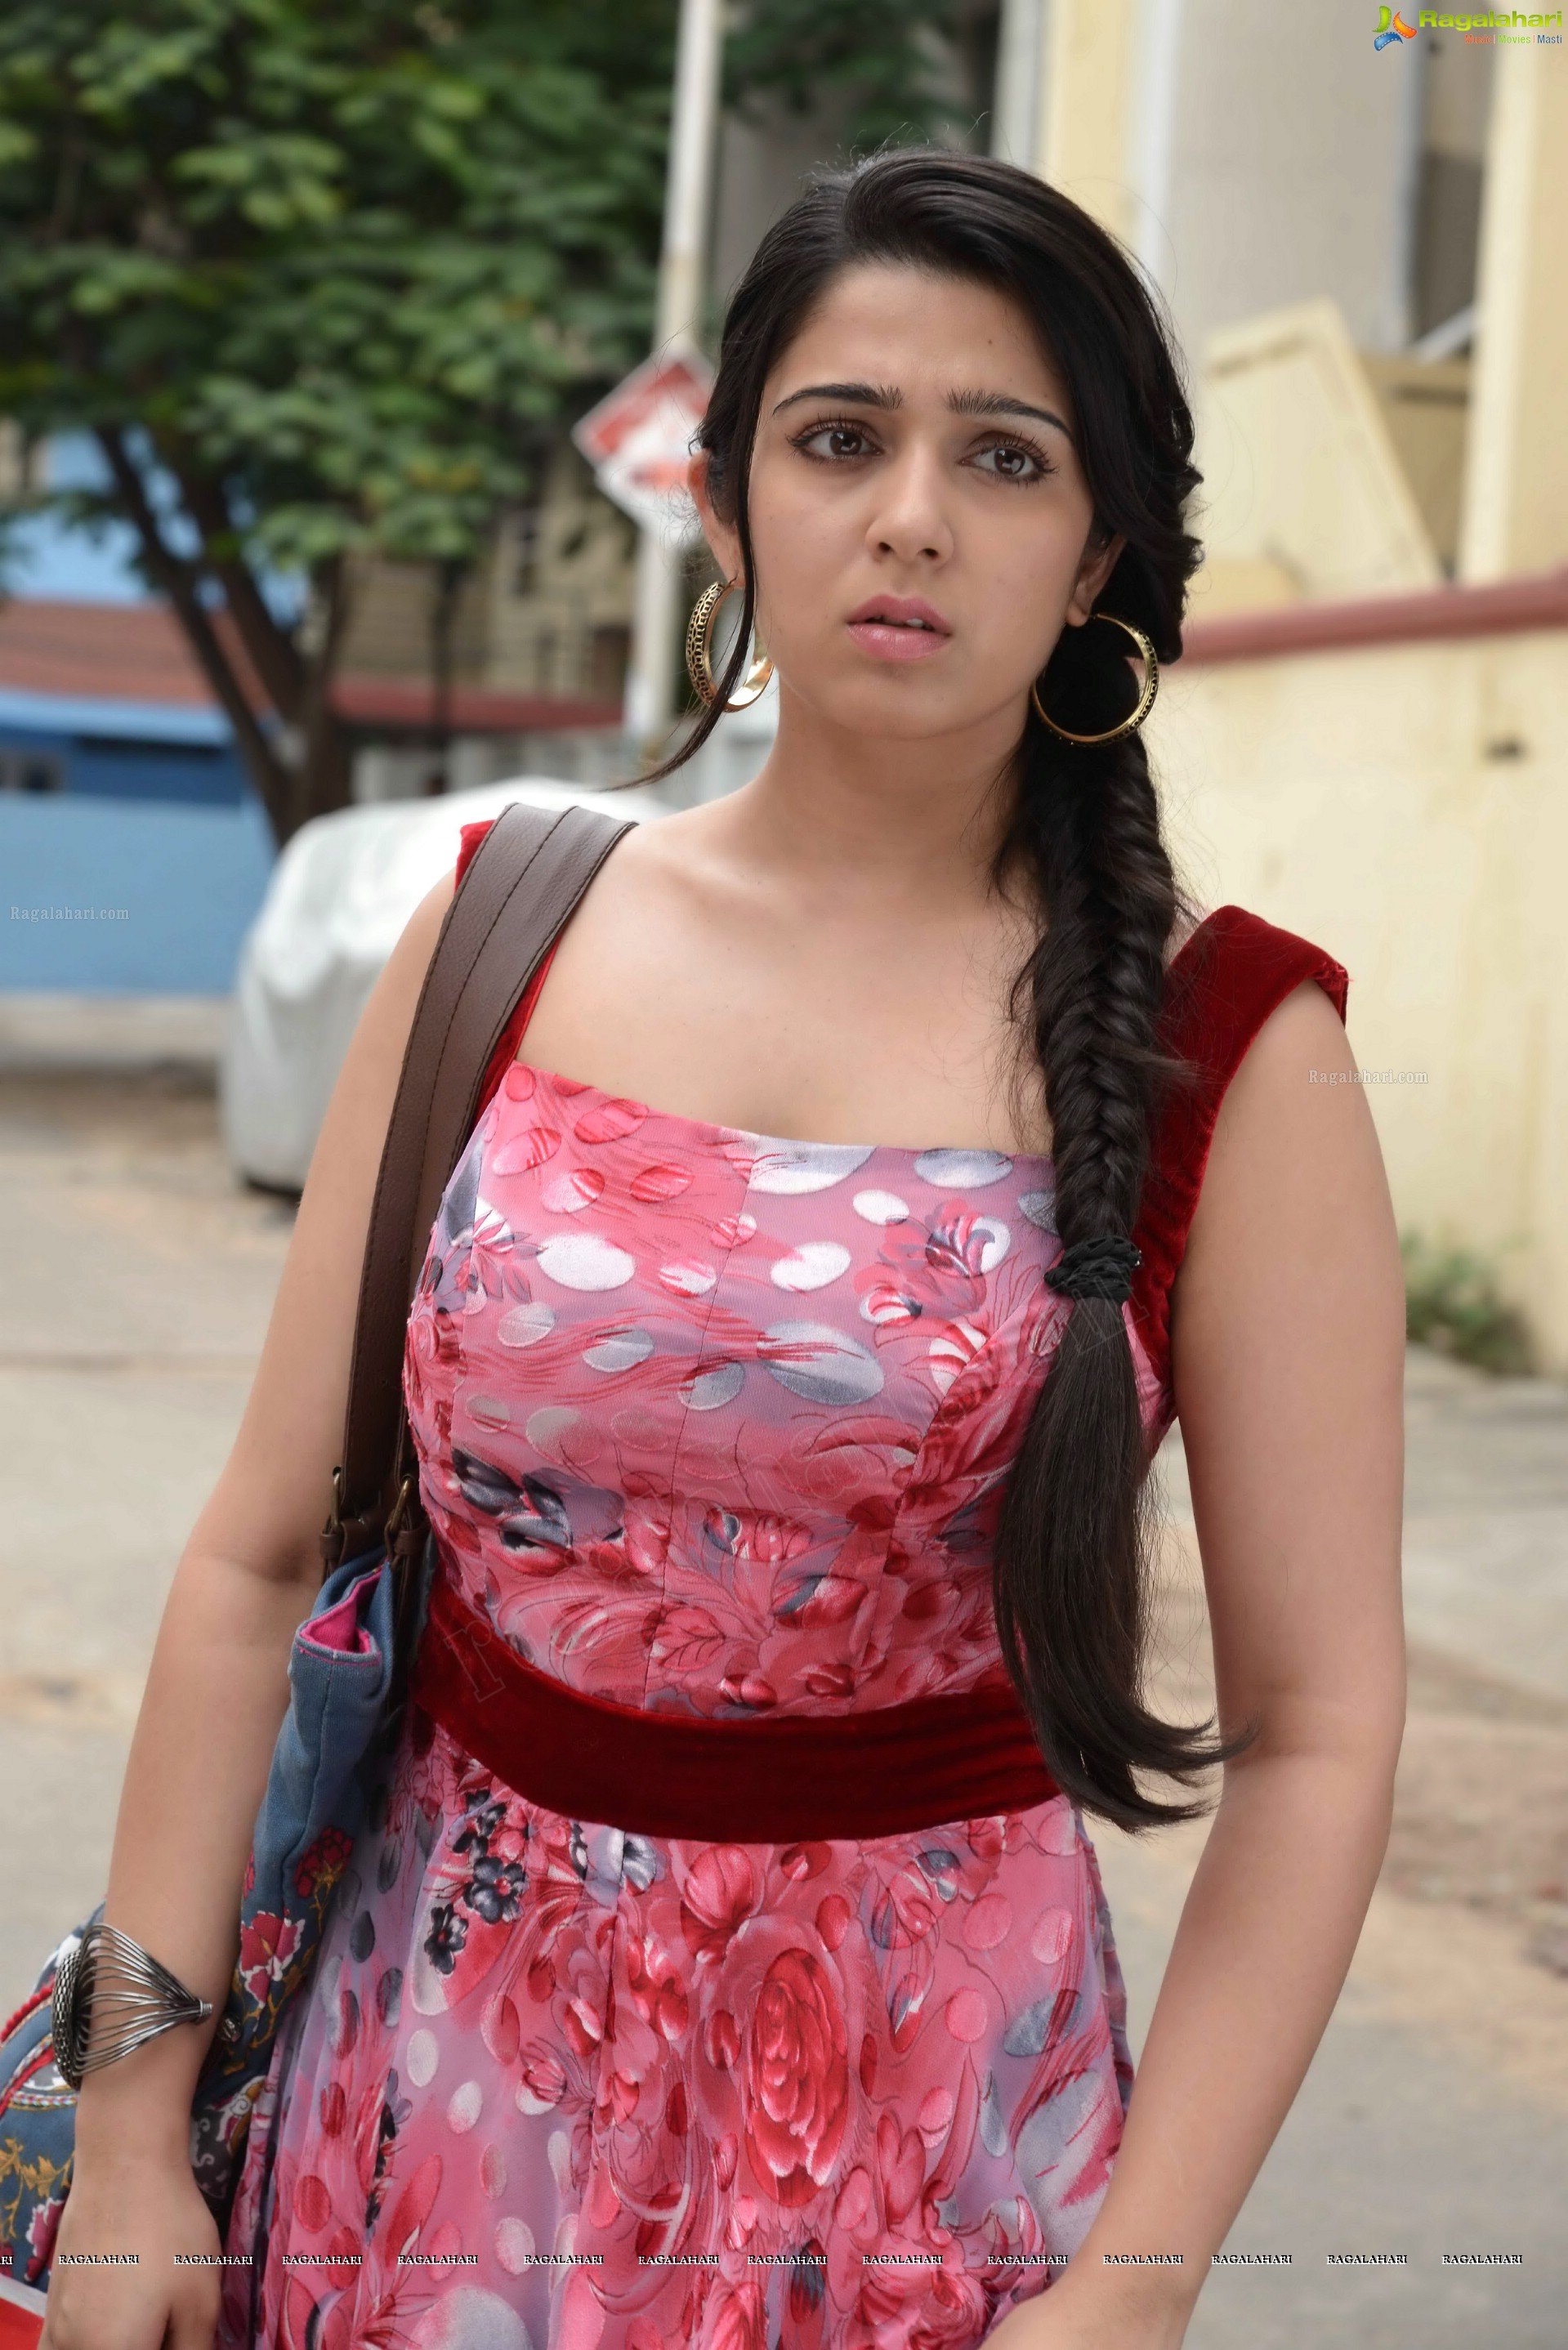 Charmme Kaur Stills From Mantra 2, HD Gallery, Images